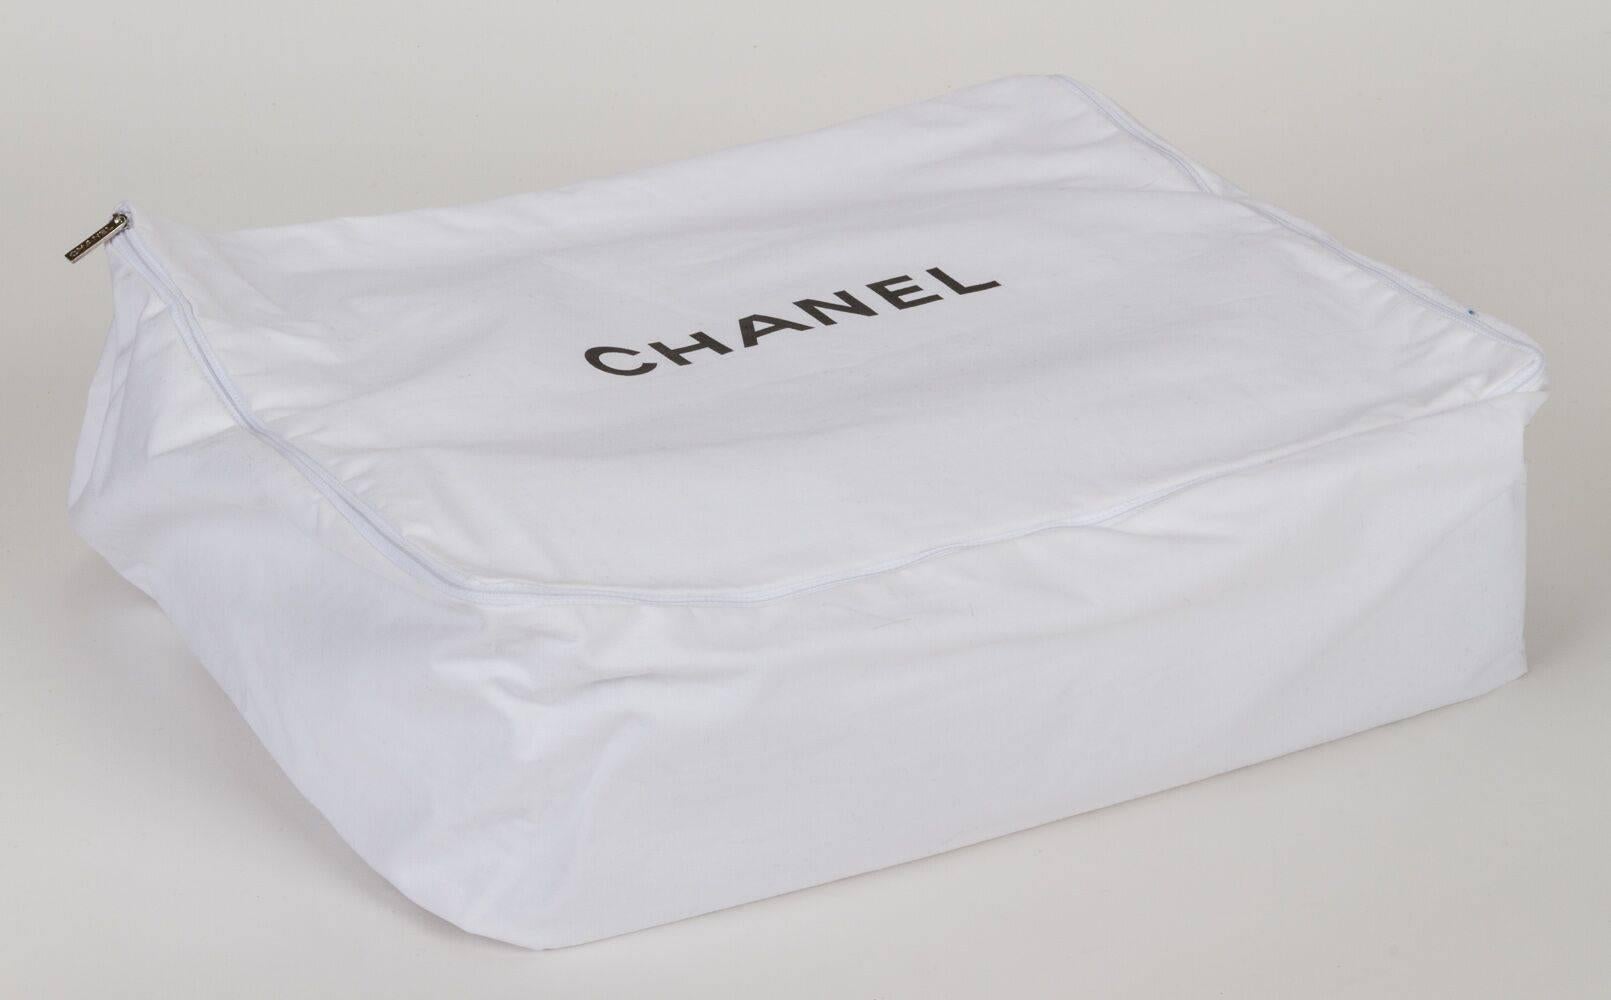 New Chanel Wool Cashmere Blend Blanket with Box In New Condition For Sale In West Hollywood, CA